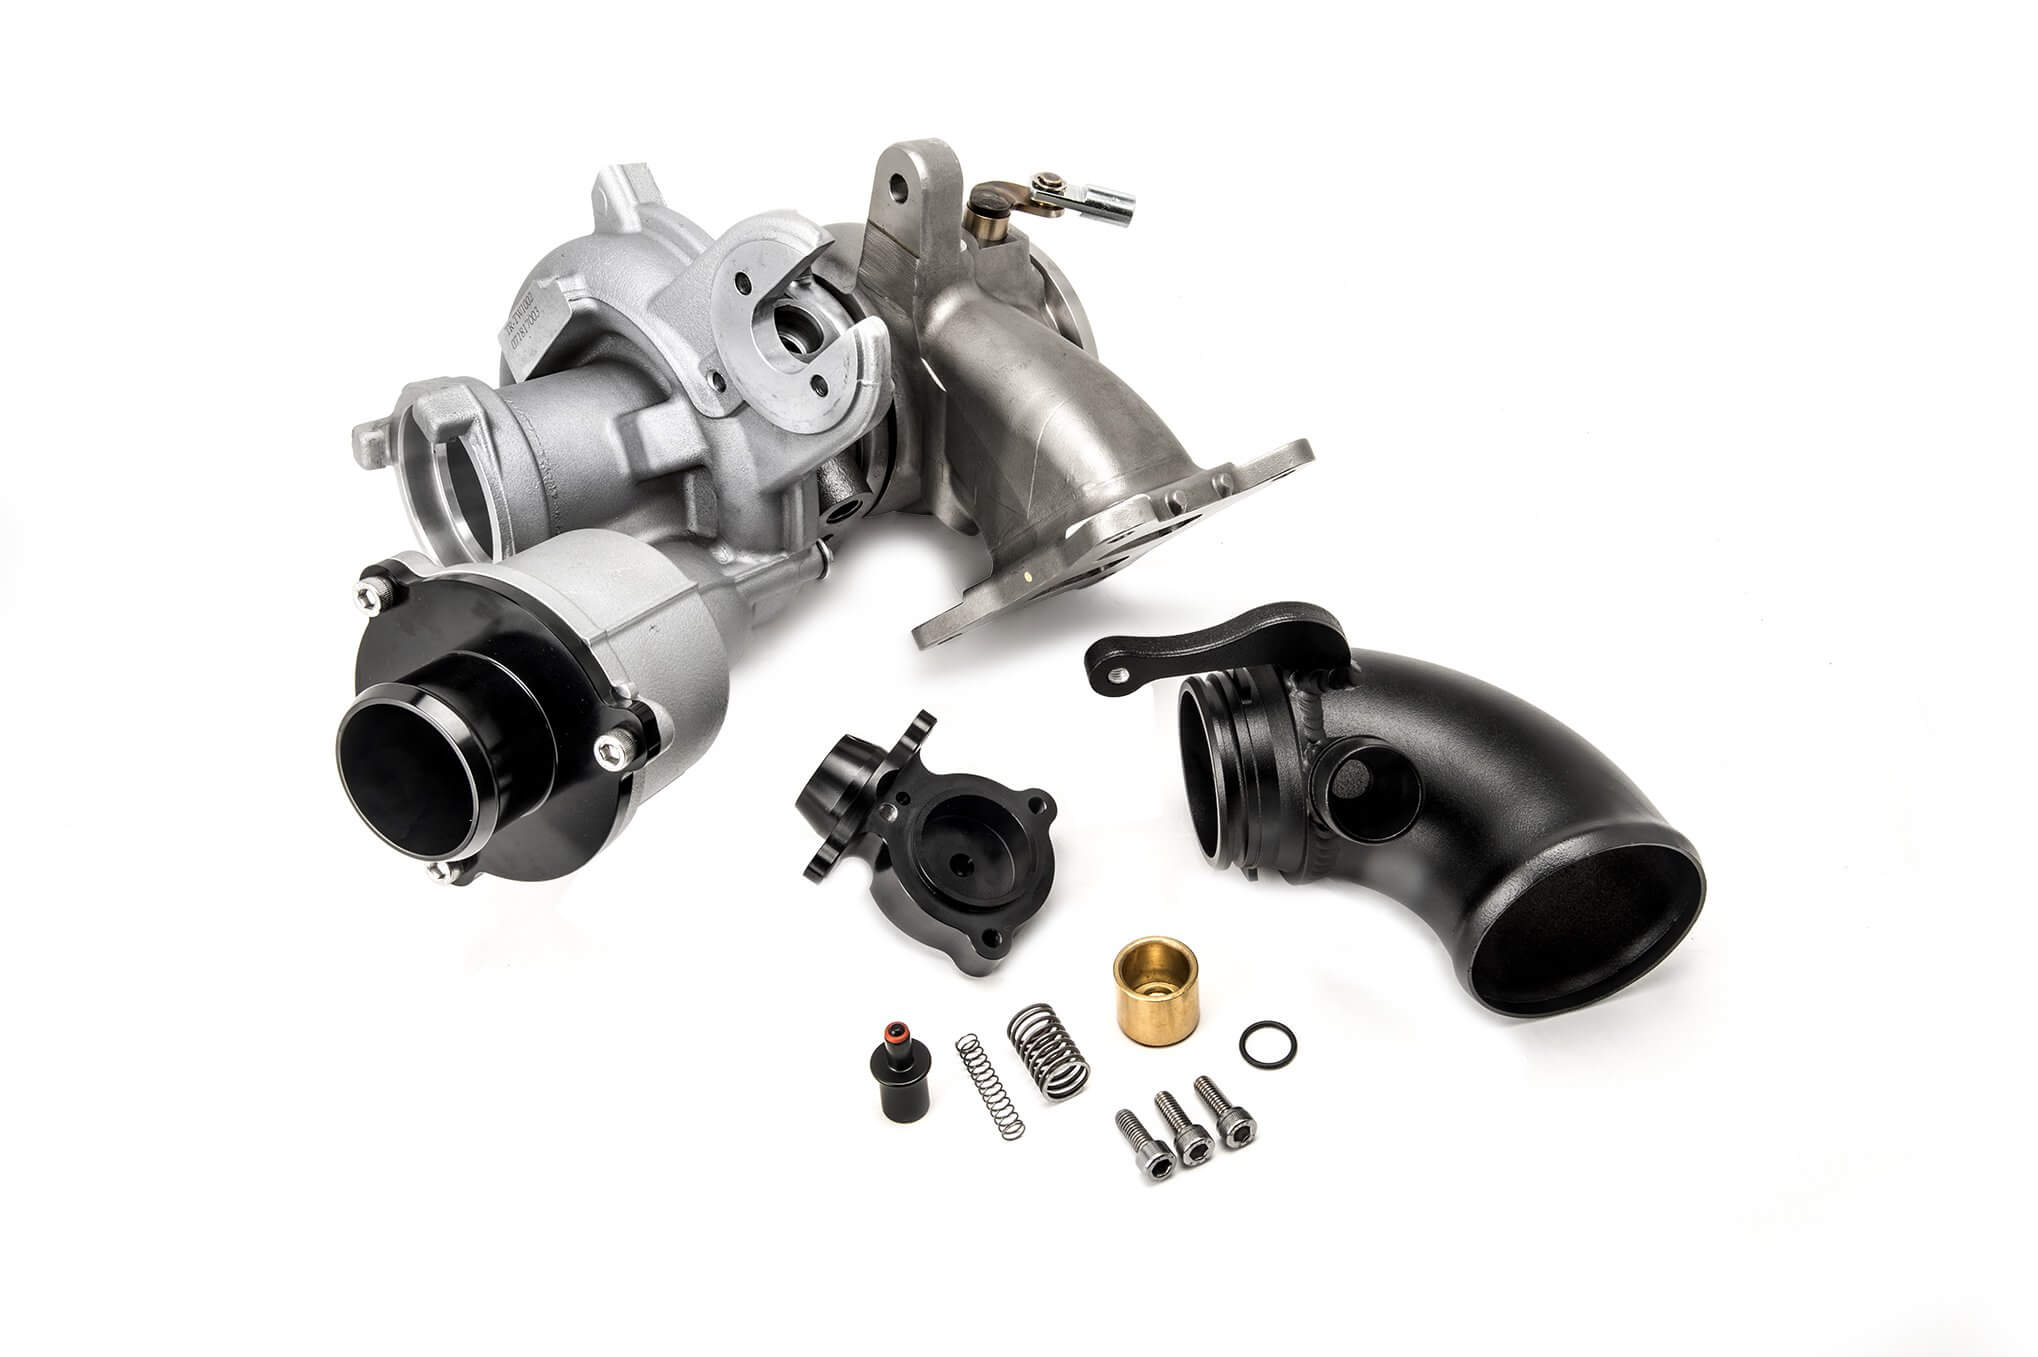 TR IHX475 - Turbo Upgrade for VW / AUDI EA888 Gen 3 (MQB) and 